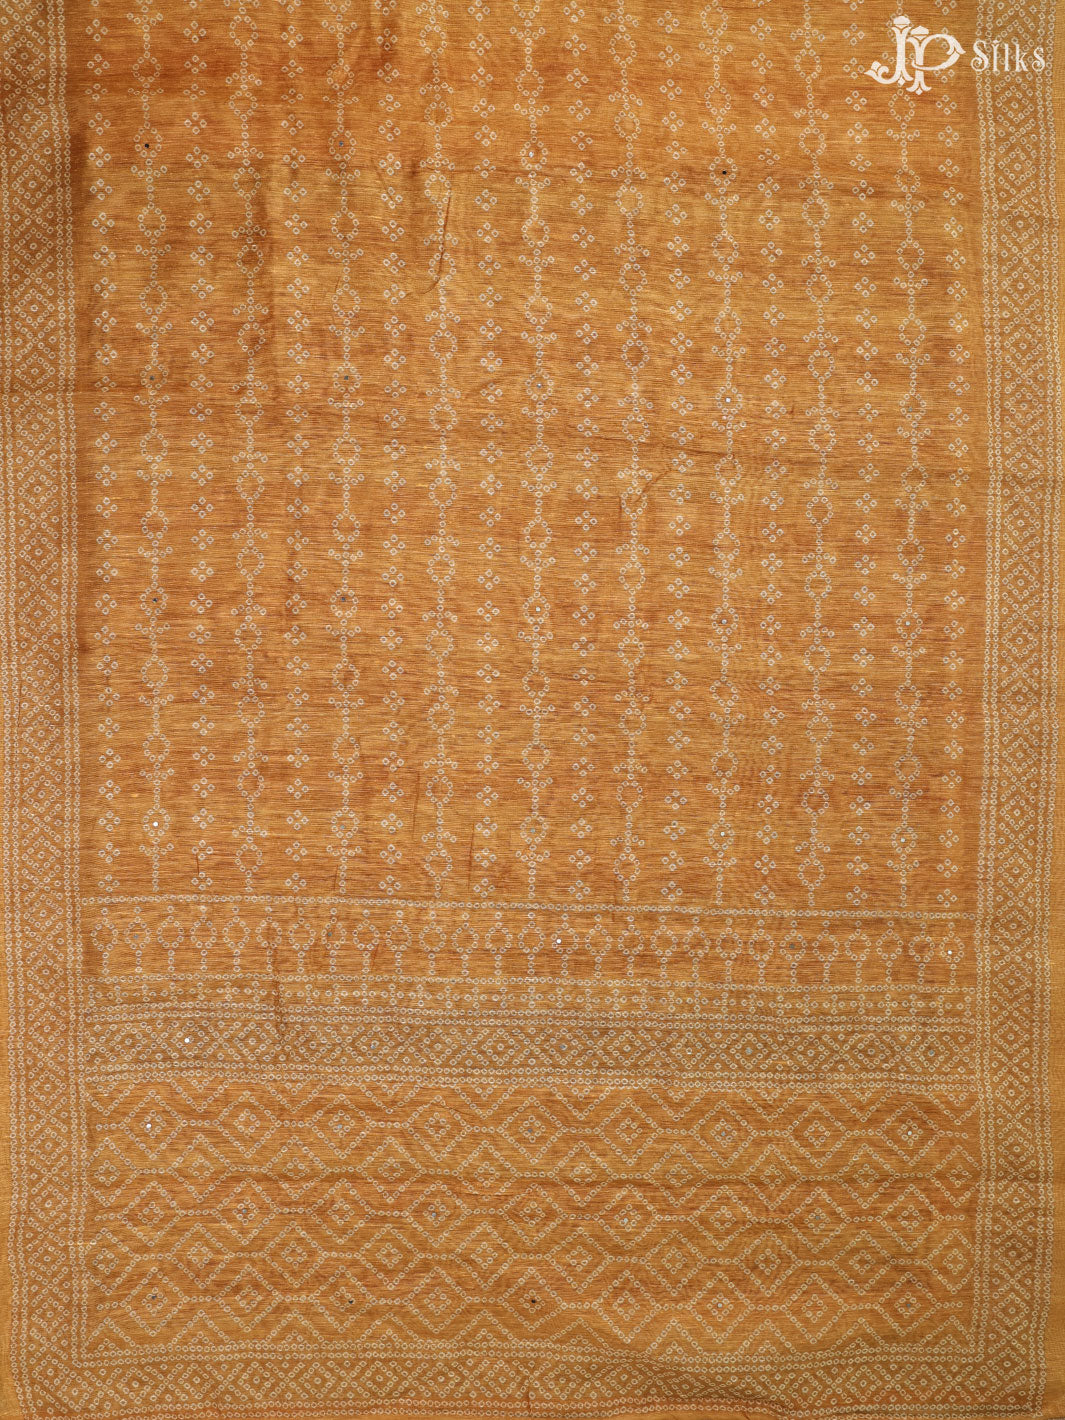 Yellow Tussar Unstiched Chudidhar Material - E1464 - View 4